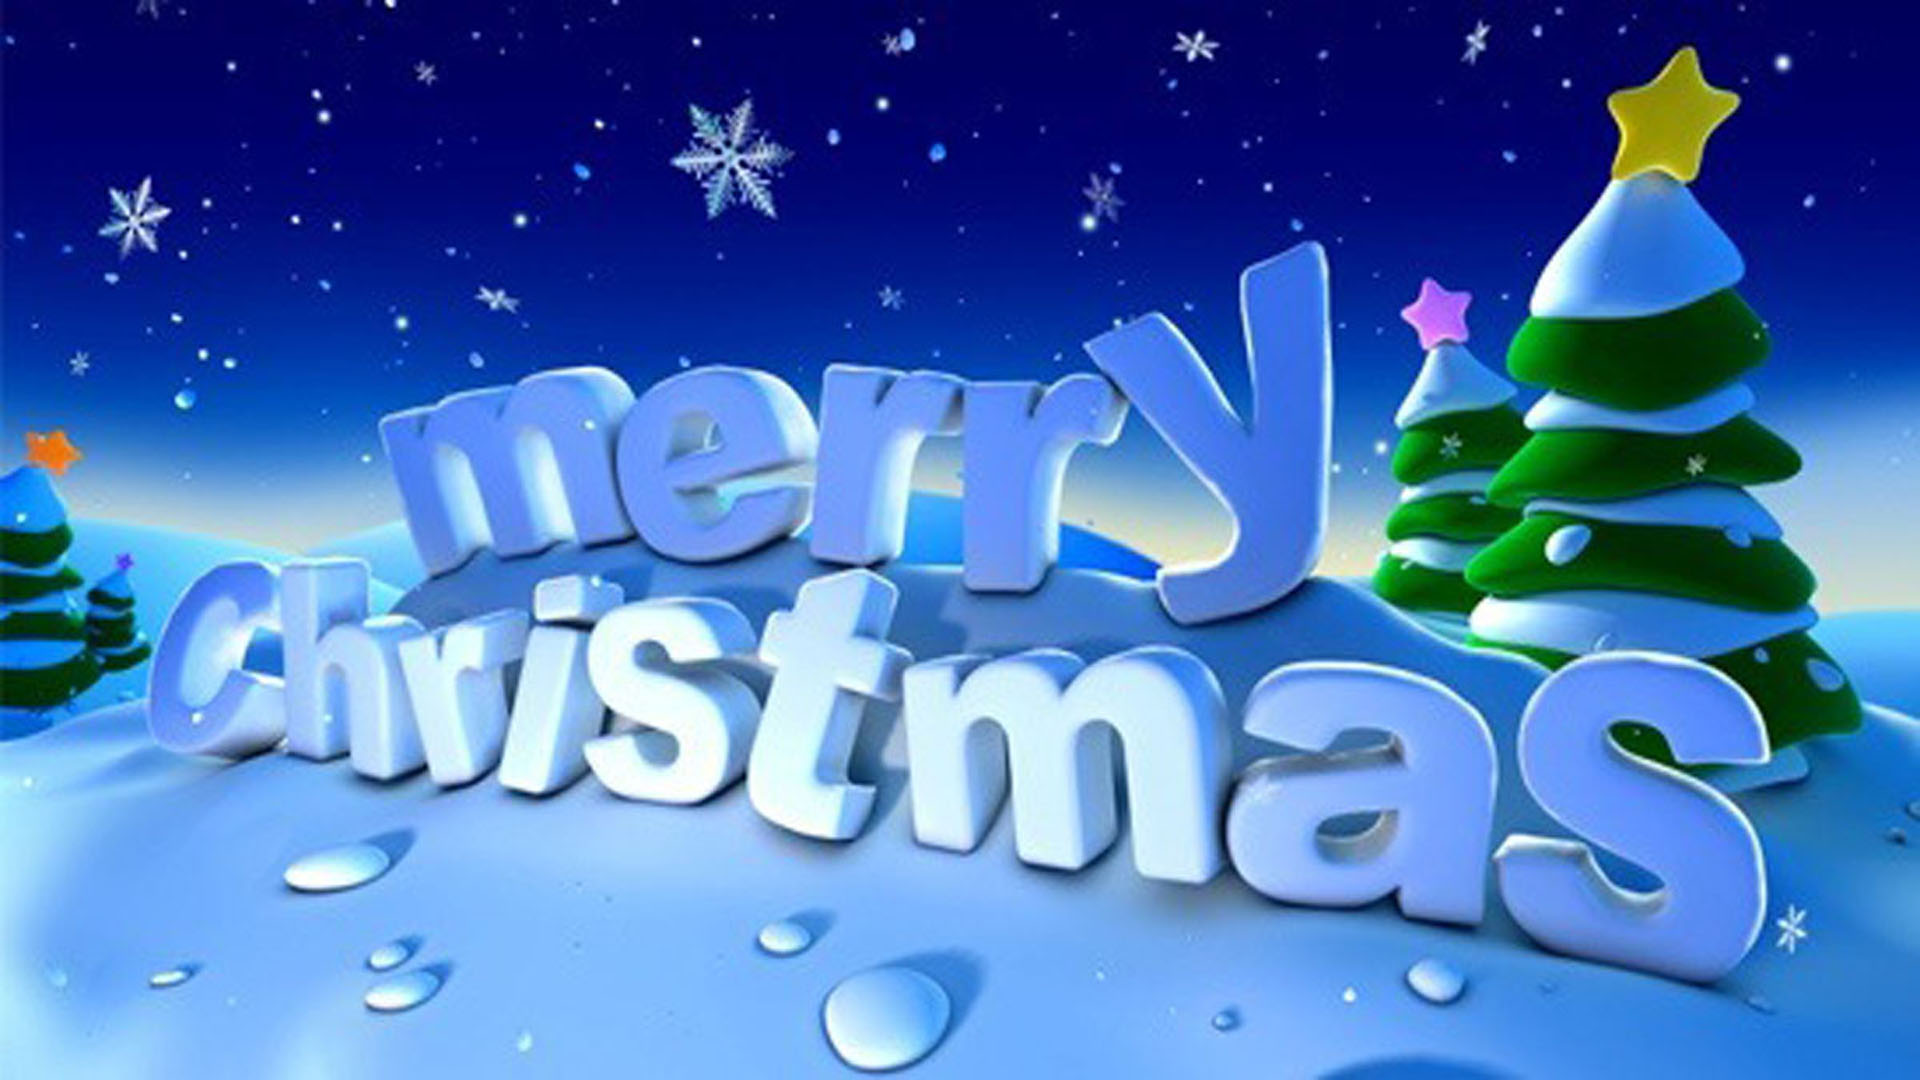 Status Christmas Wishes Images For Whatsapp - HD Wallpaper 